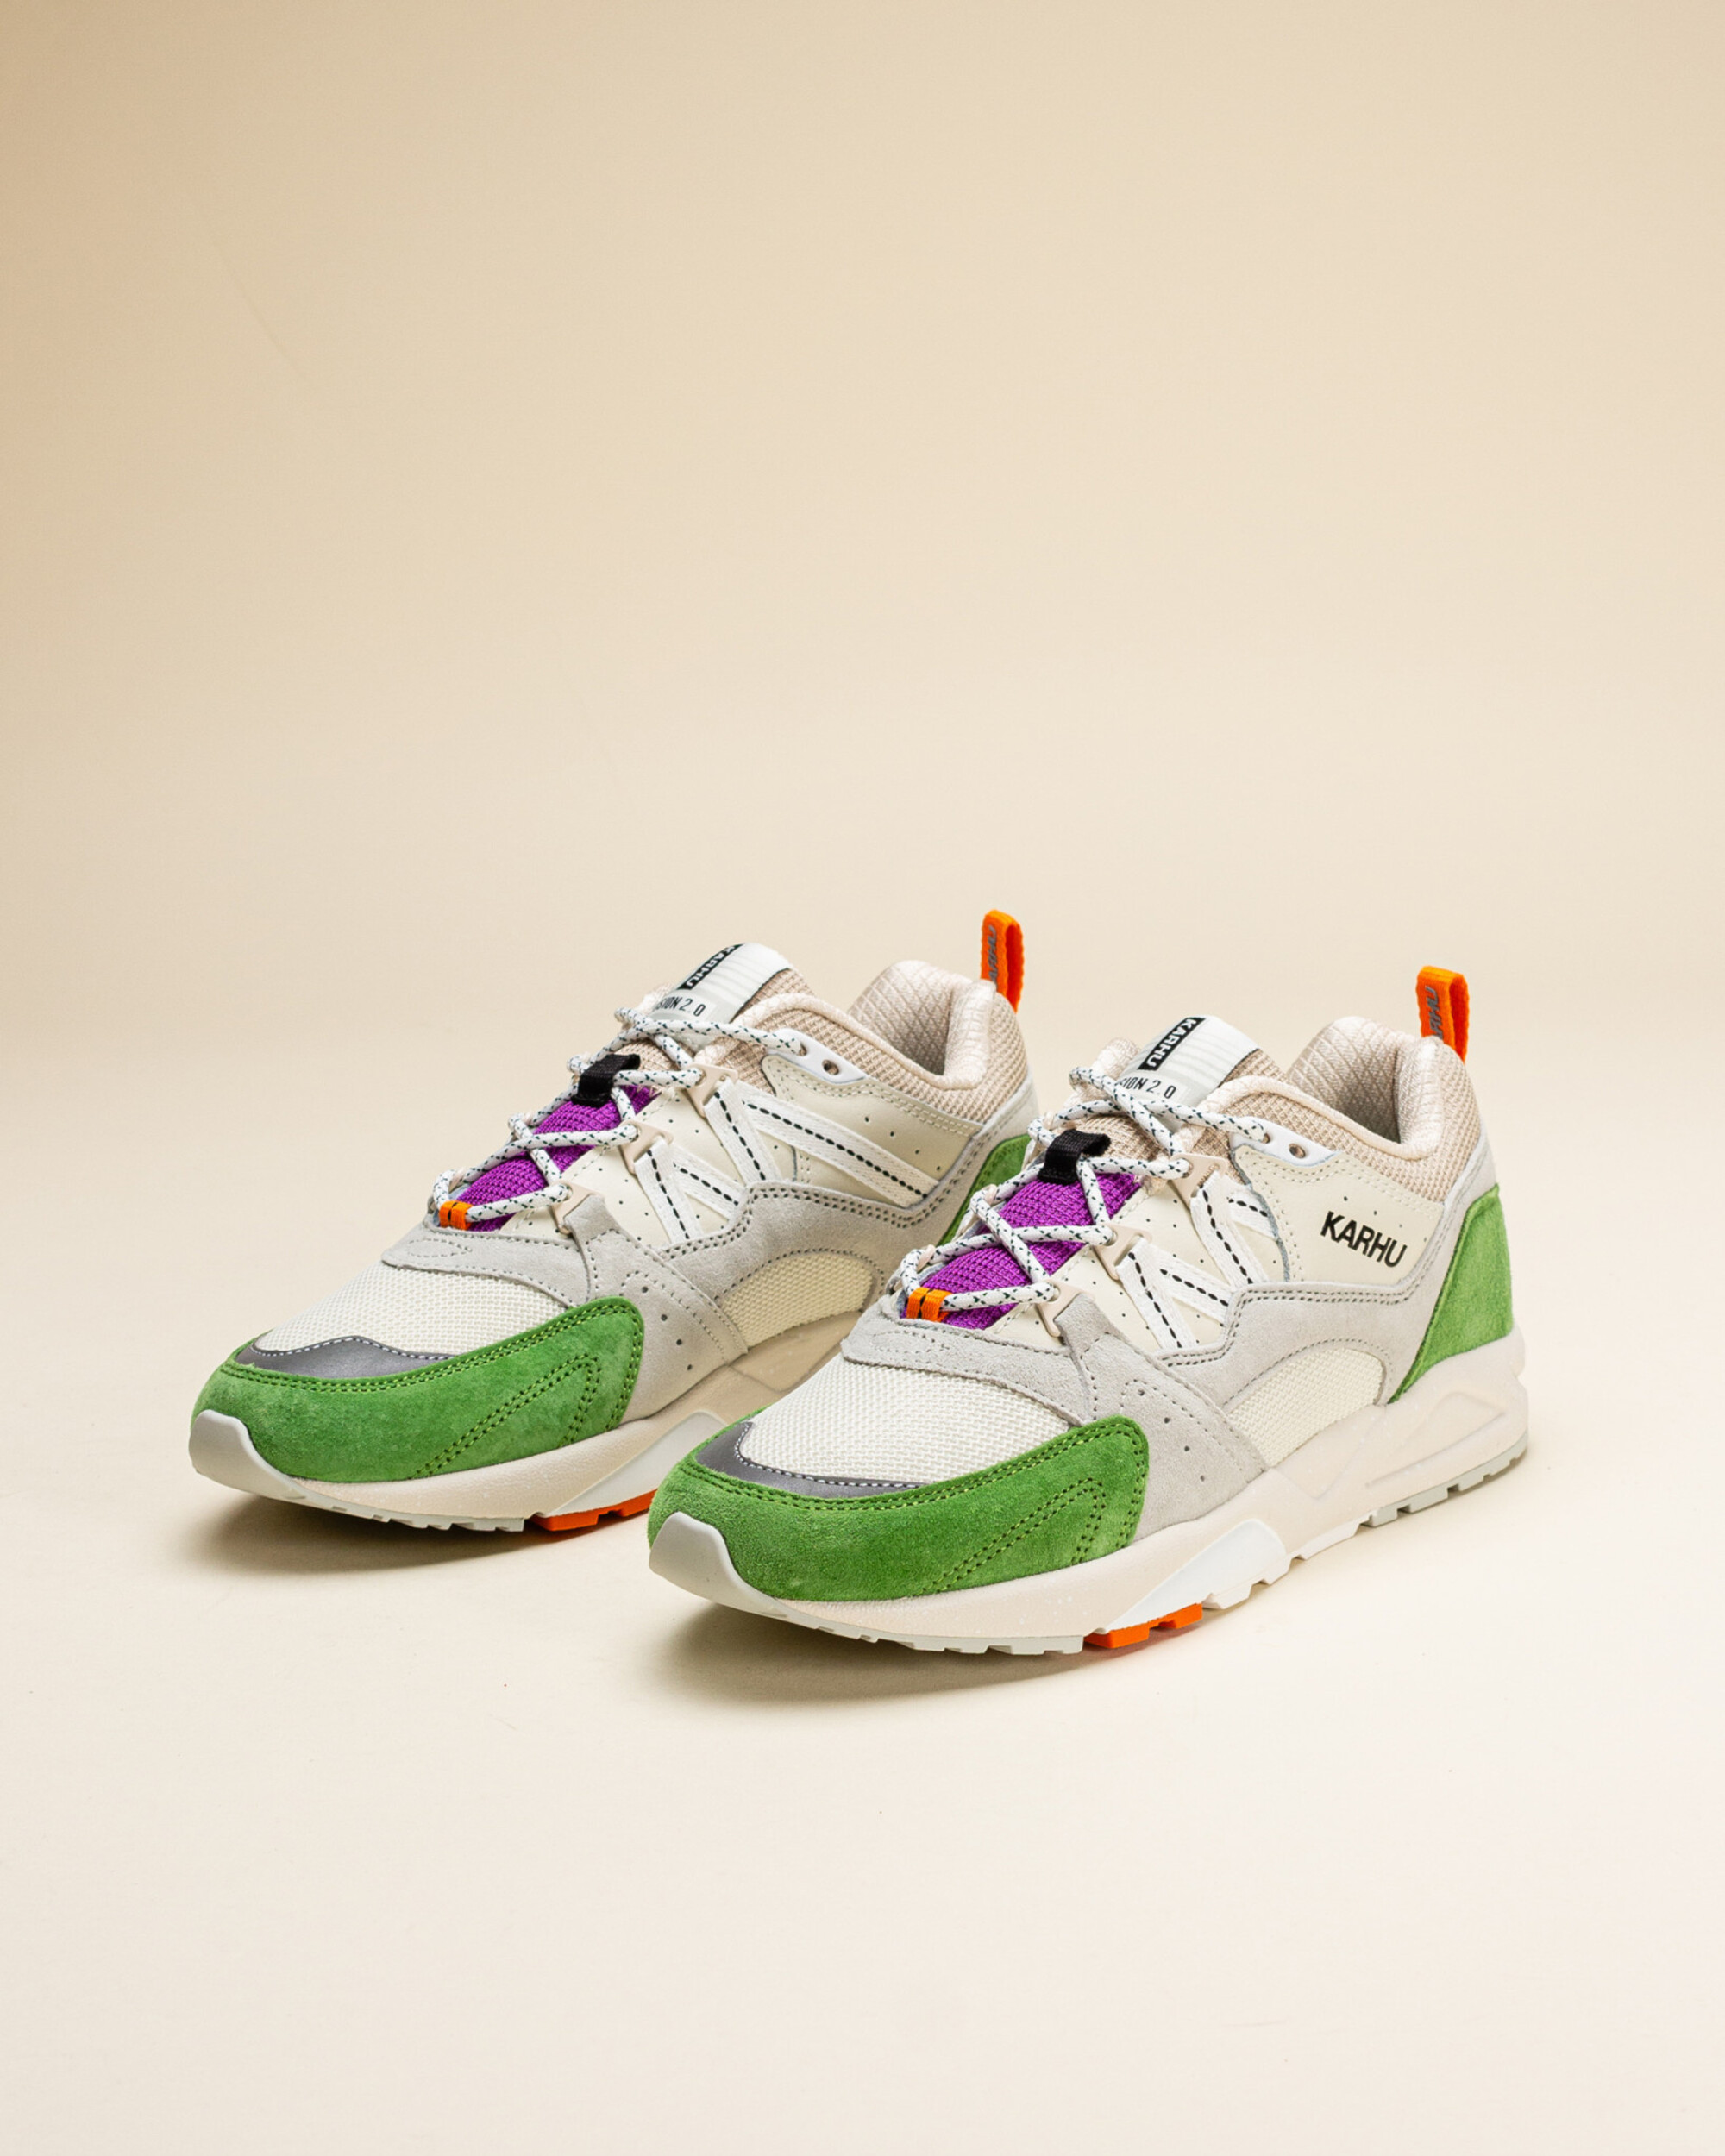 Karhu Fusion 2.0 "Flow State" Pack 2 - Piquant Green/Bright White